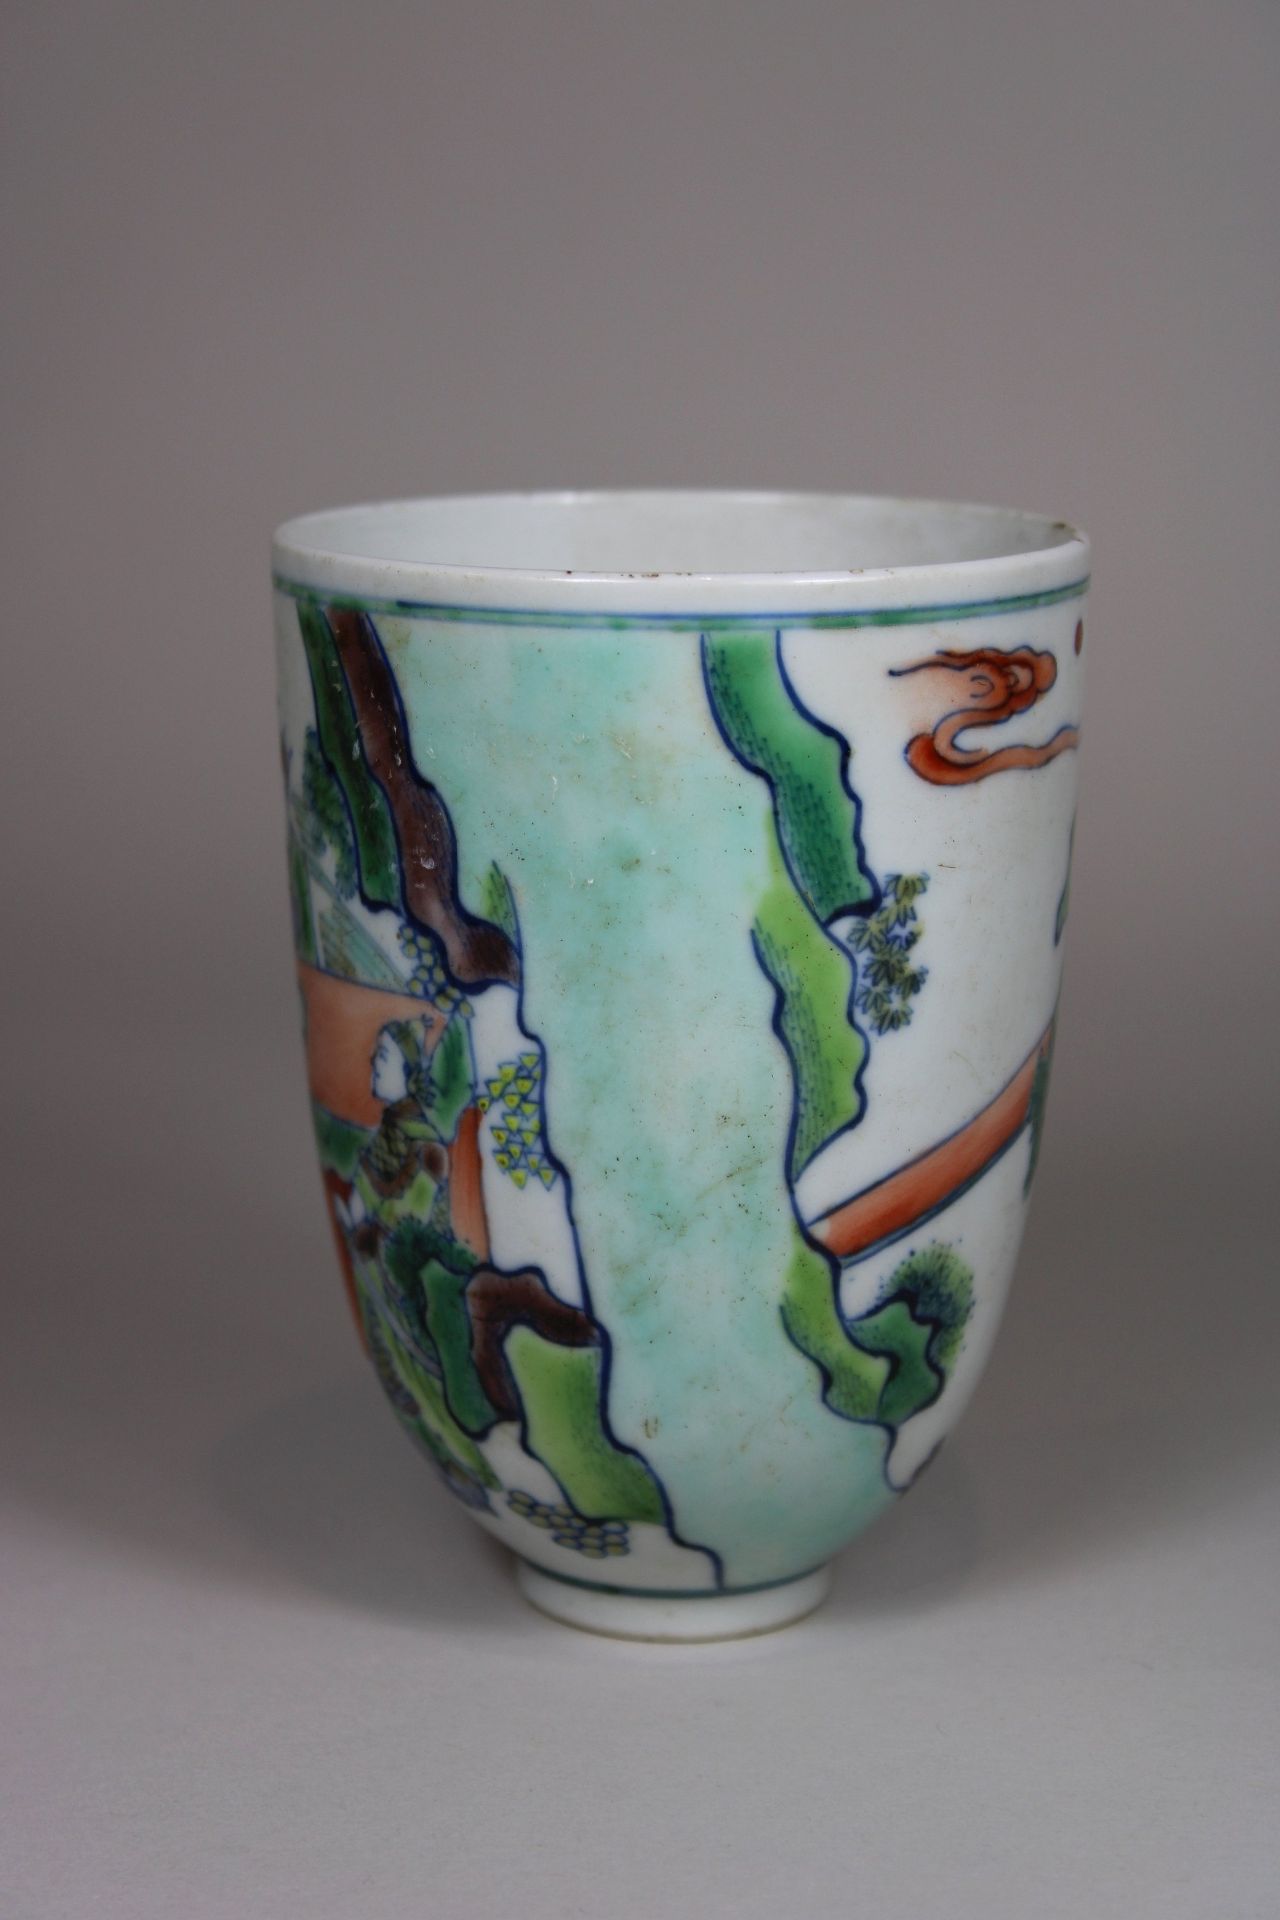 Teacup, China, Ming Dynastie - Image 3 of 5